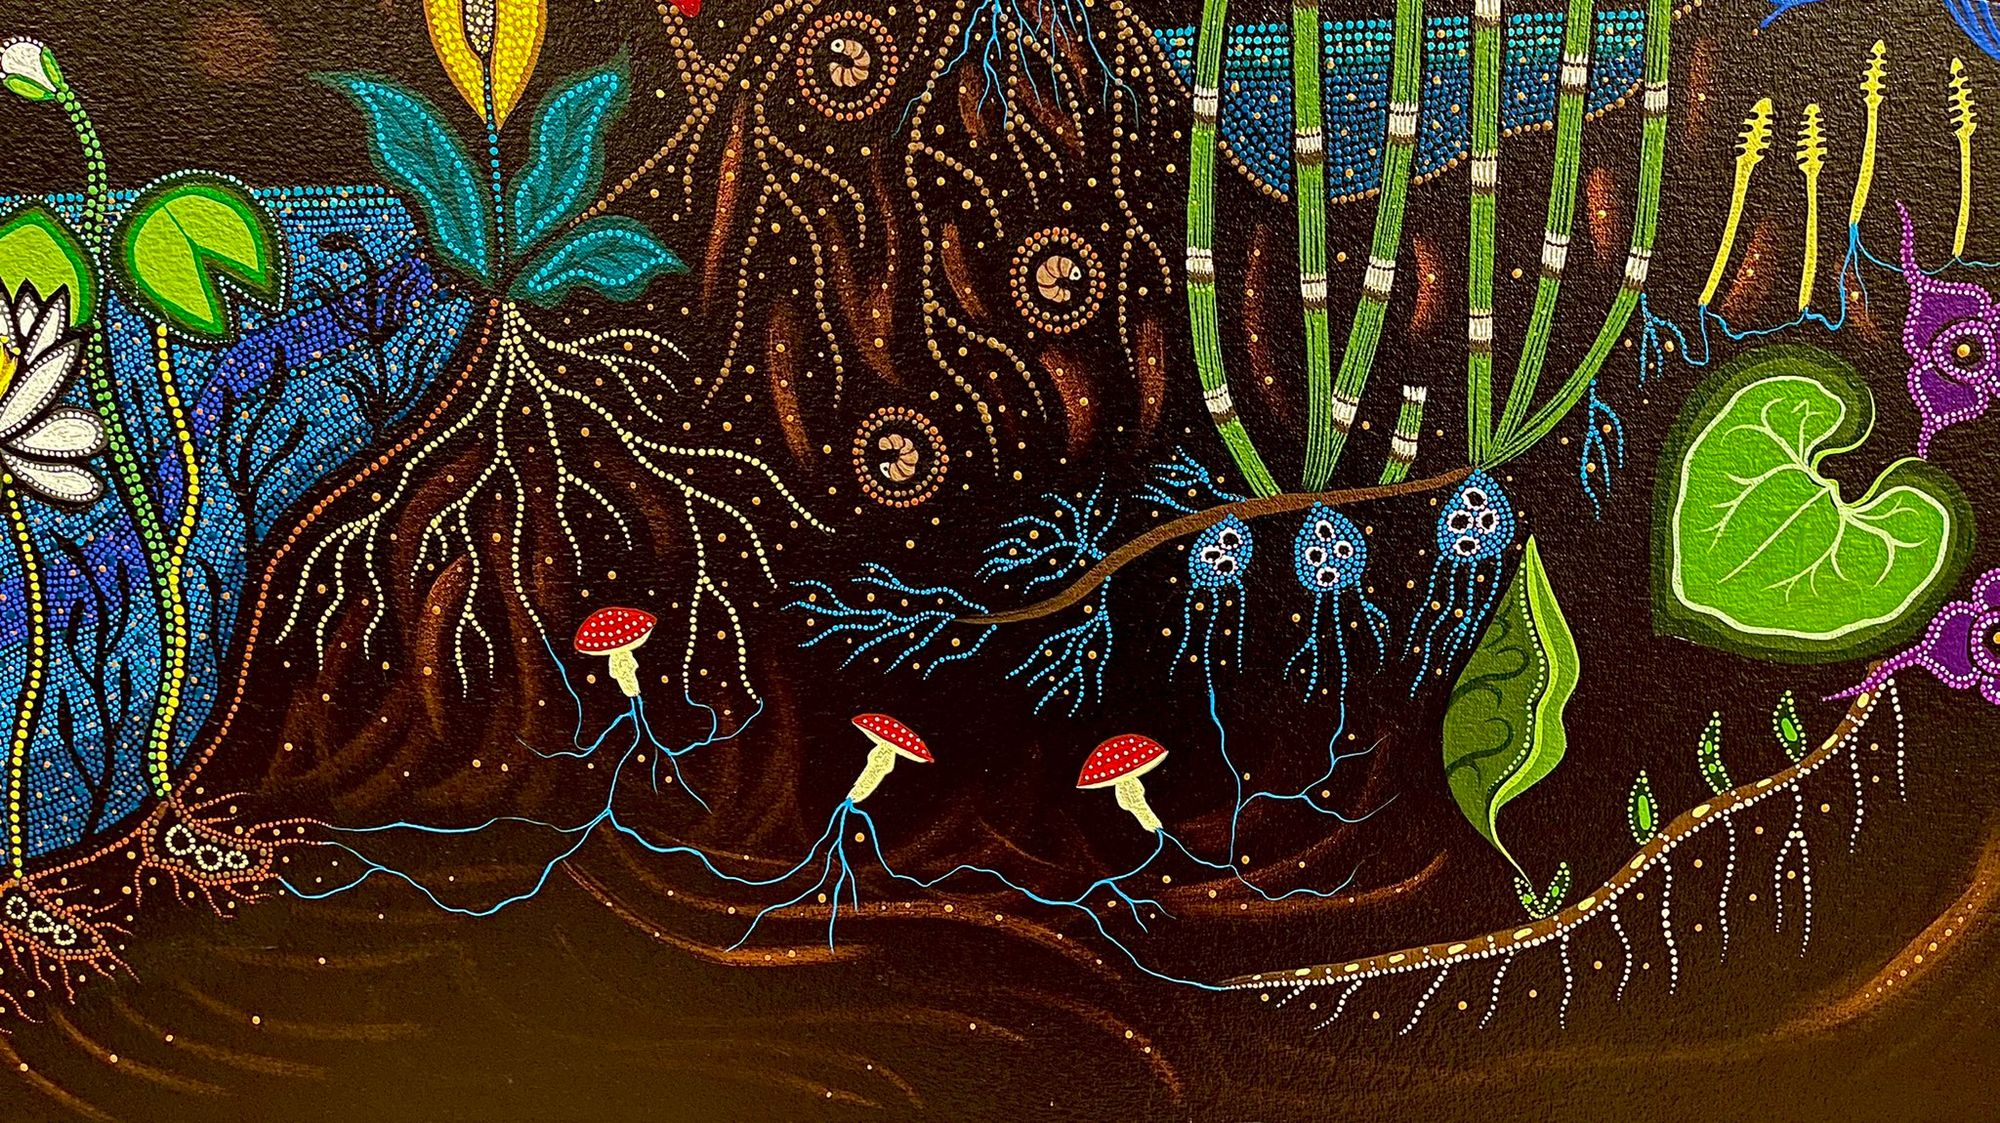 Intricate, colourful, beadwork-inspired painting of nature including mushrooms, roots, stems and leaves